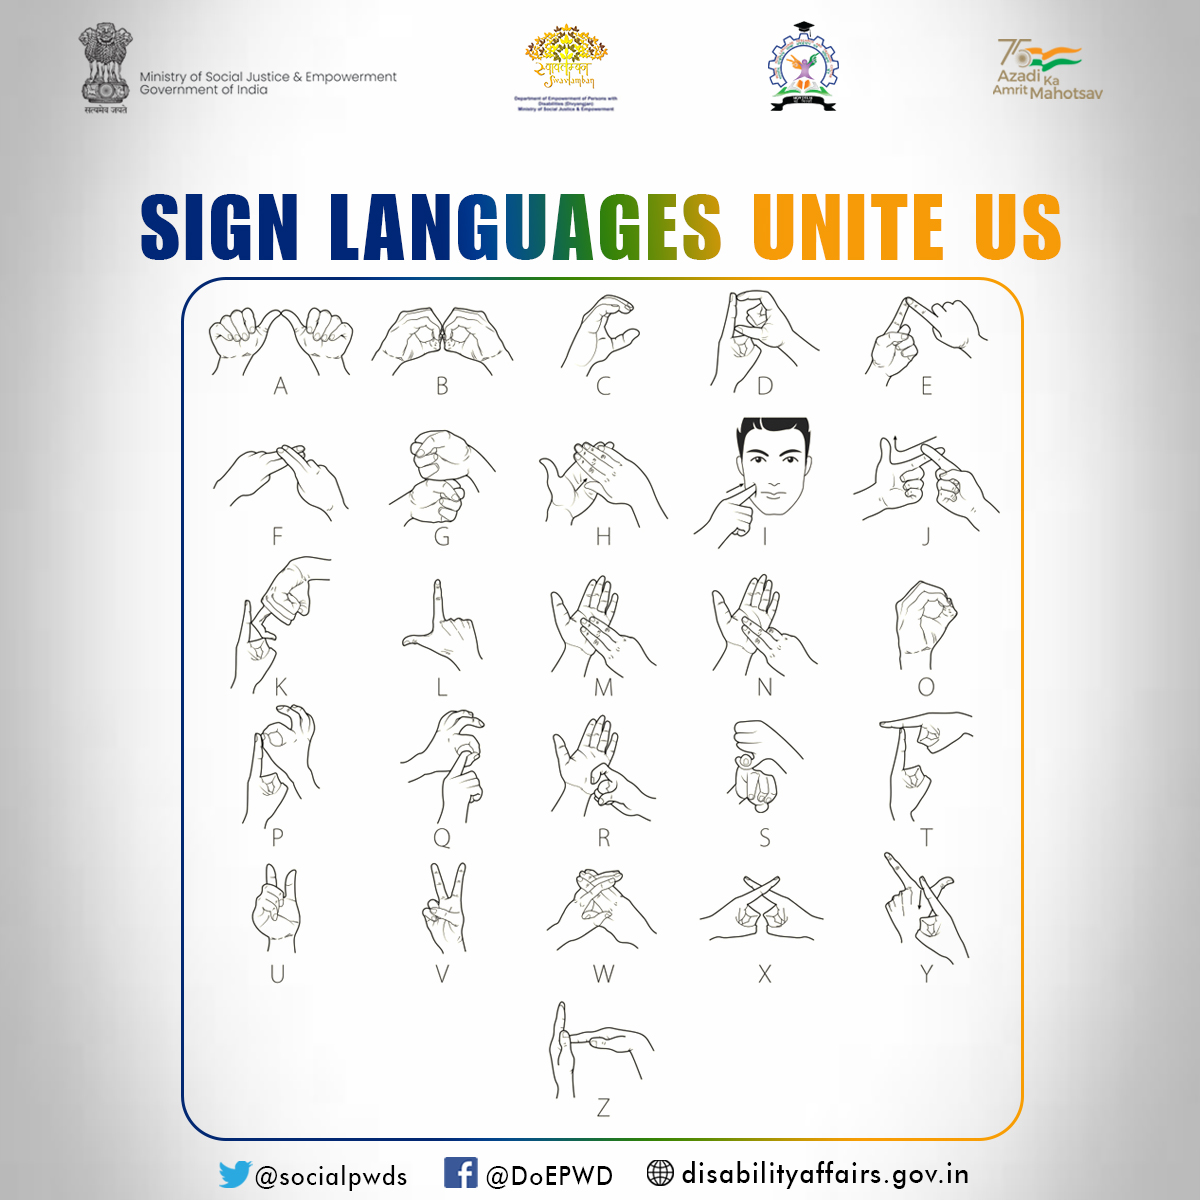 International Day of Sign Language - 23rd Sept.,2022.

#SignLanguageDay2022, #signlanguageuniteus #onenationonesignlanguage